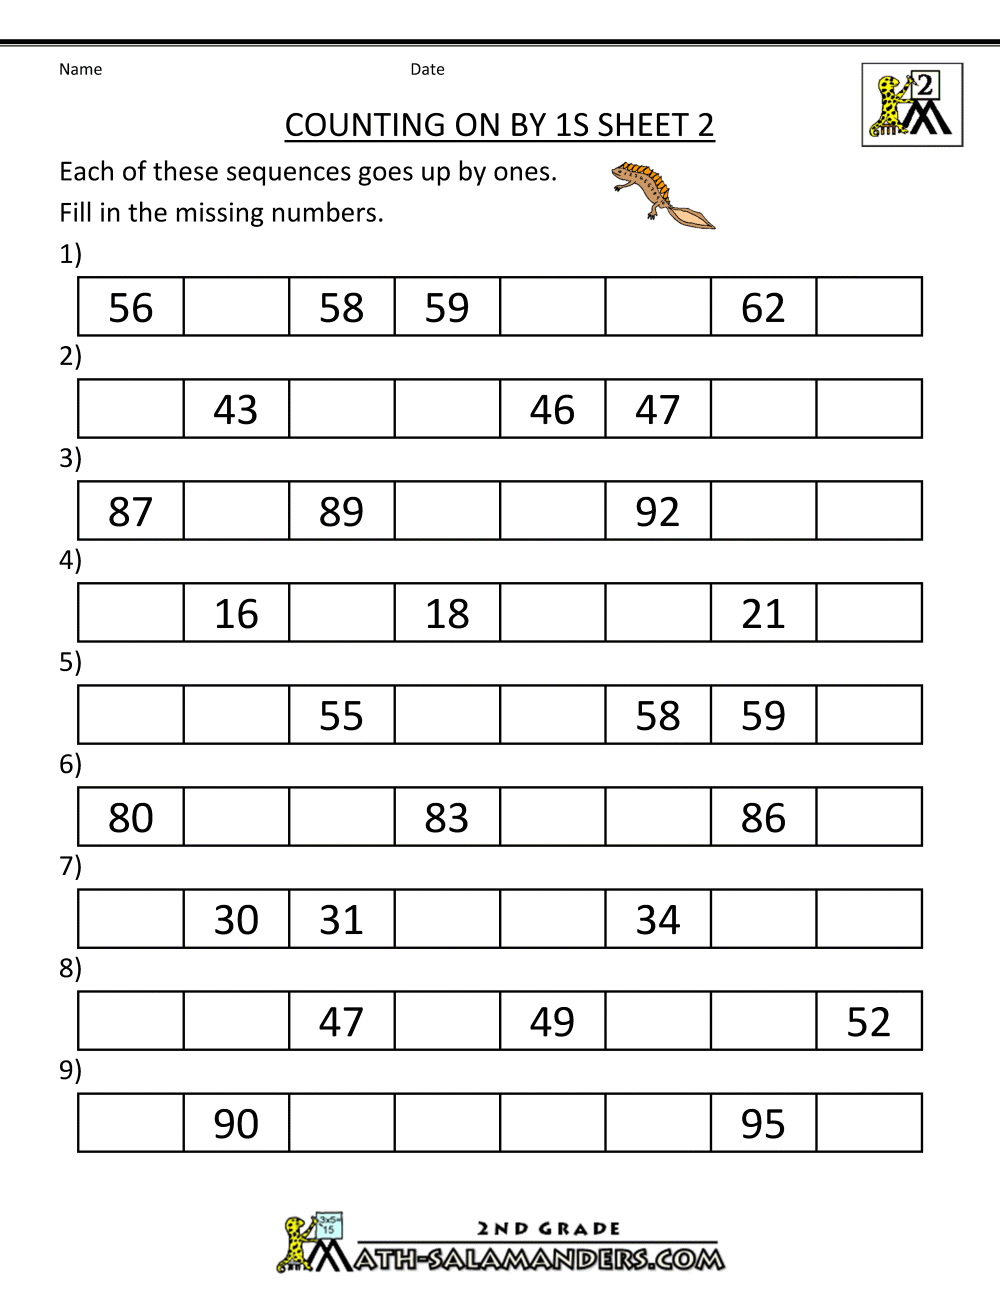 printables-free-math-worksheets-grade-2-tempojs-thousands-of-printable-activities